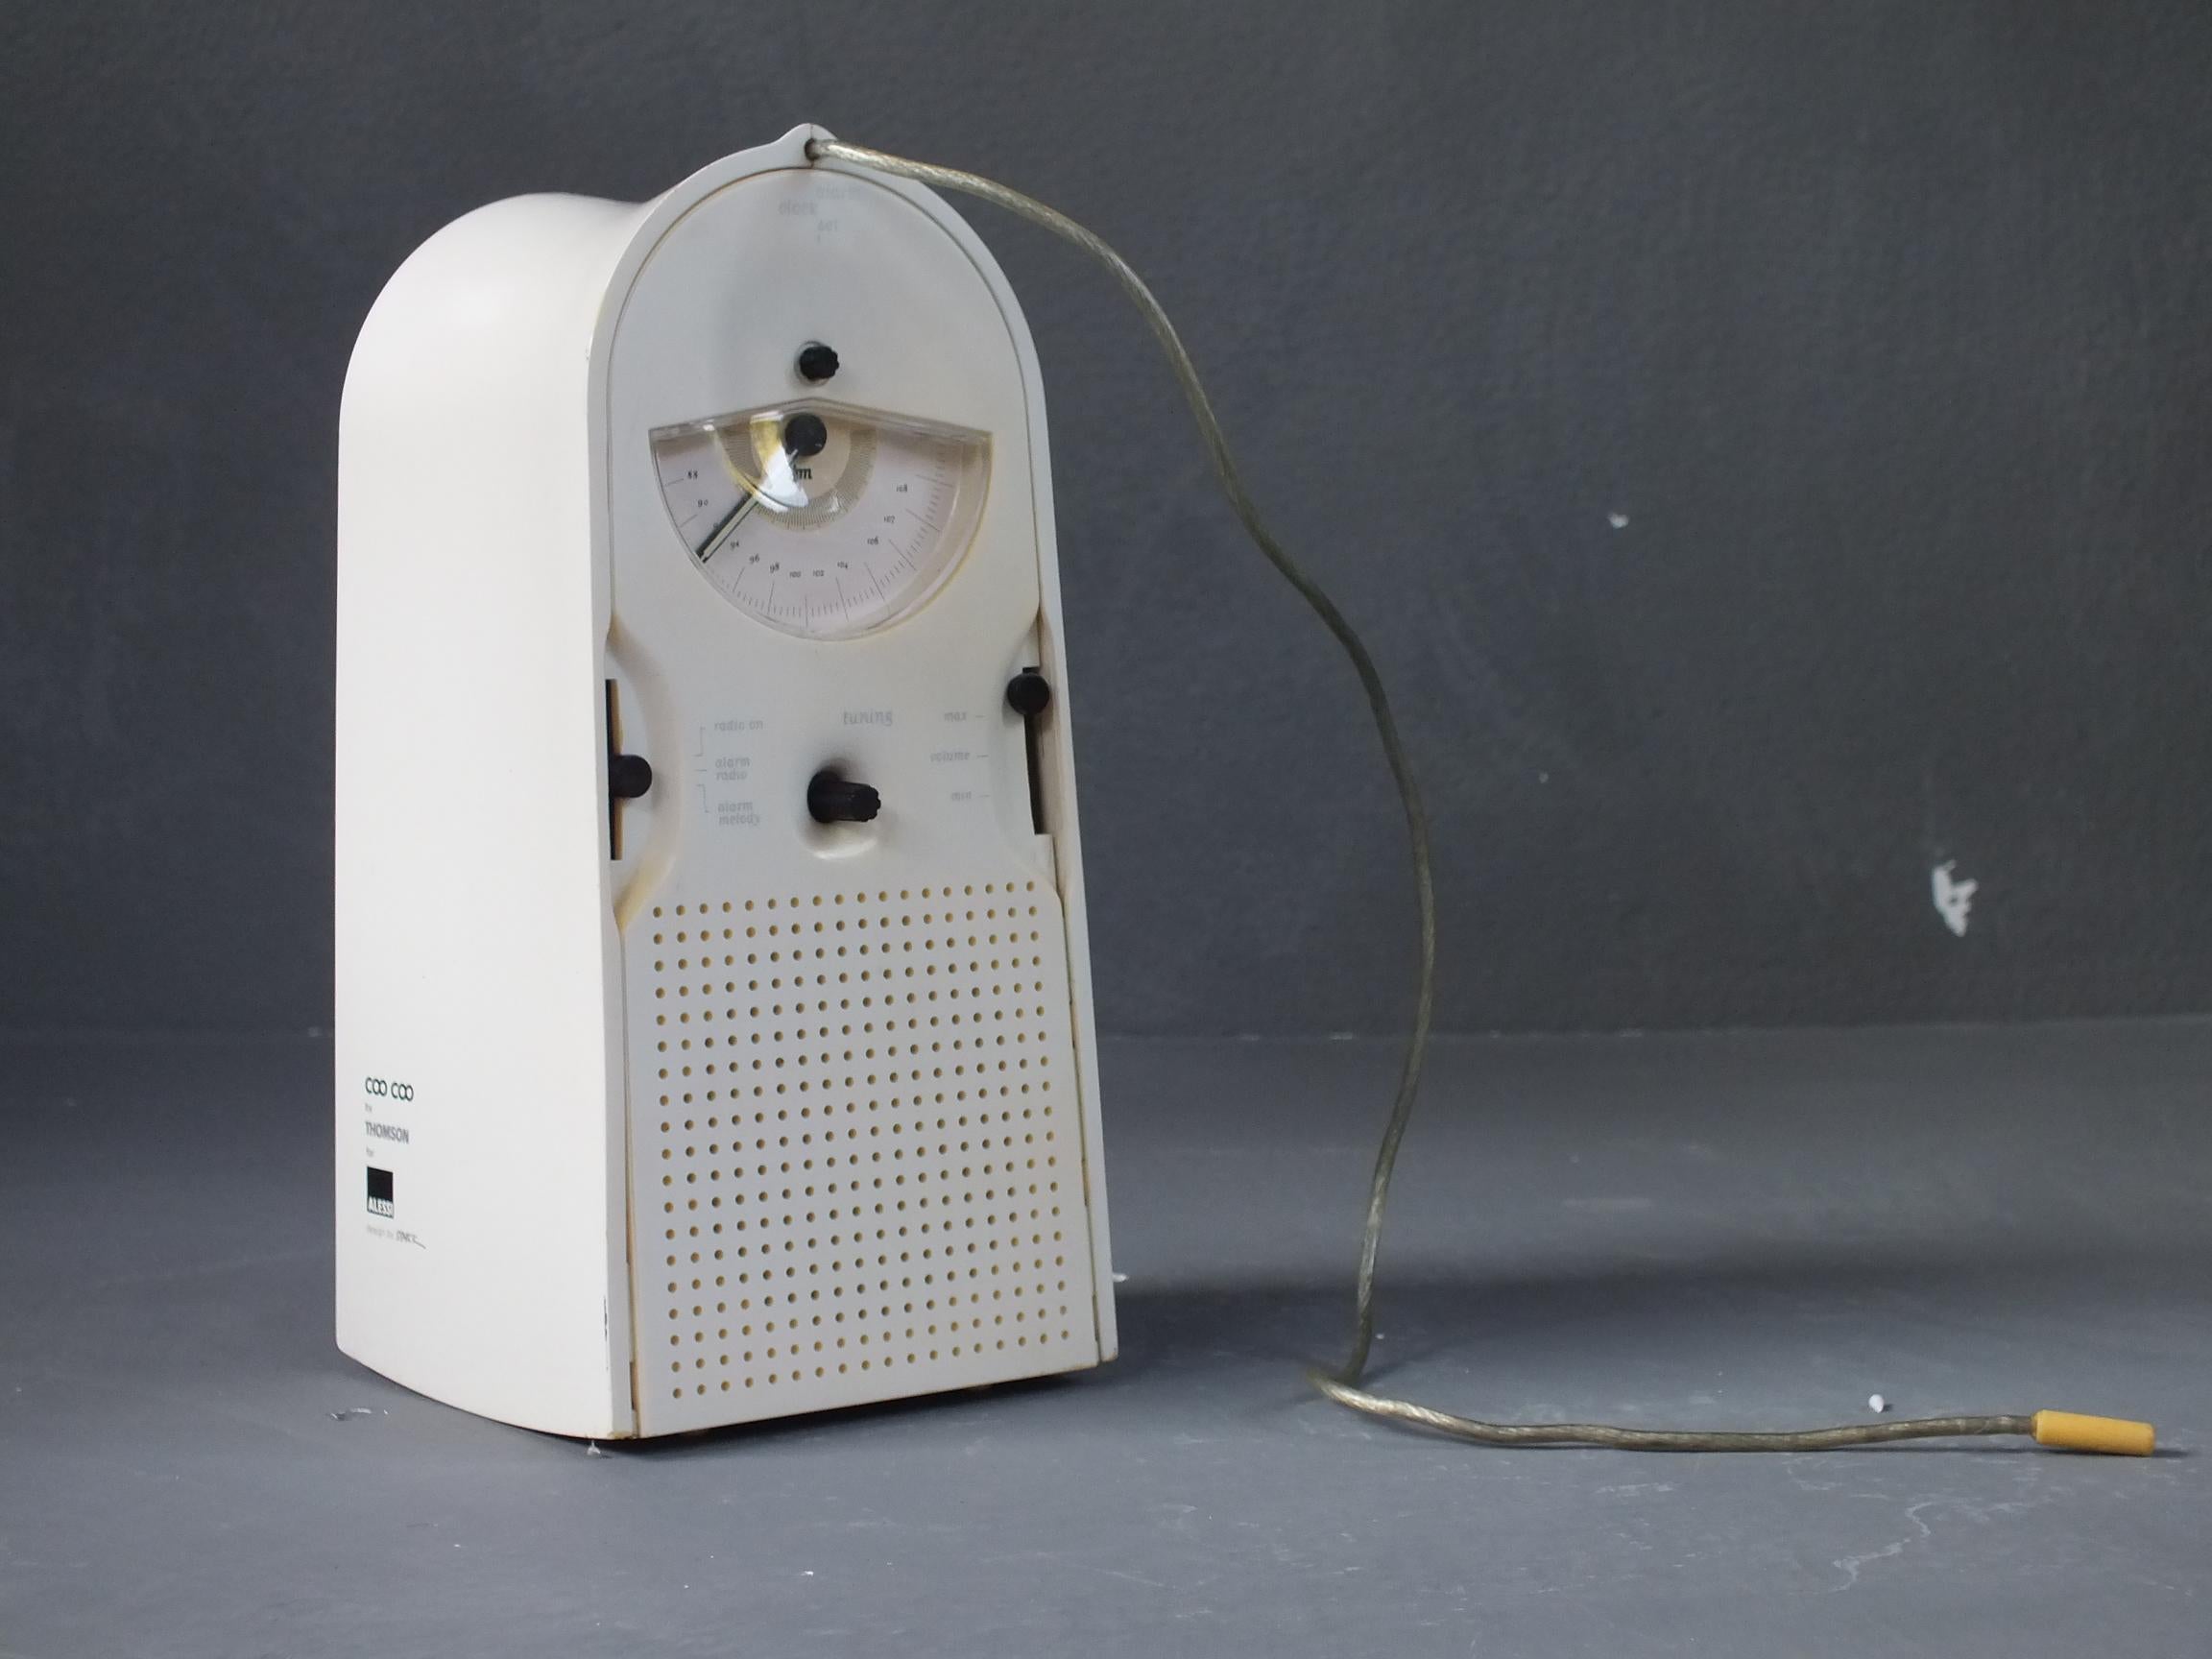 Italian Thomson Prod. Alessi Clock Radio Coo Coo by Pilippe Starck Design Year 1994 For Sale